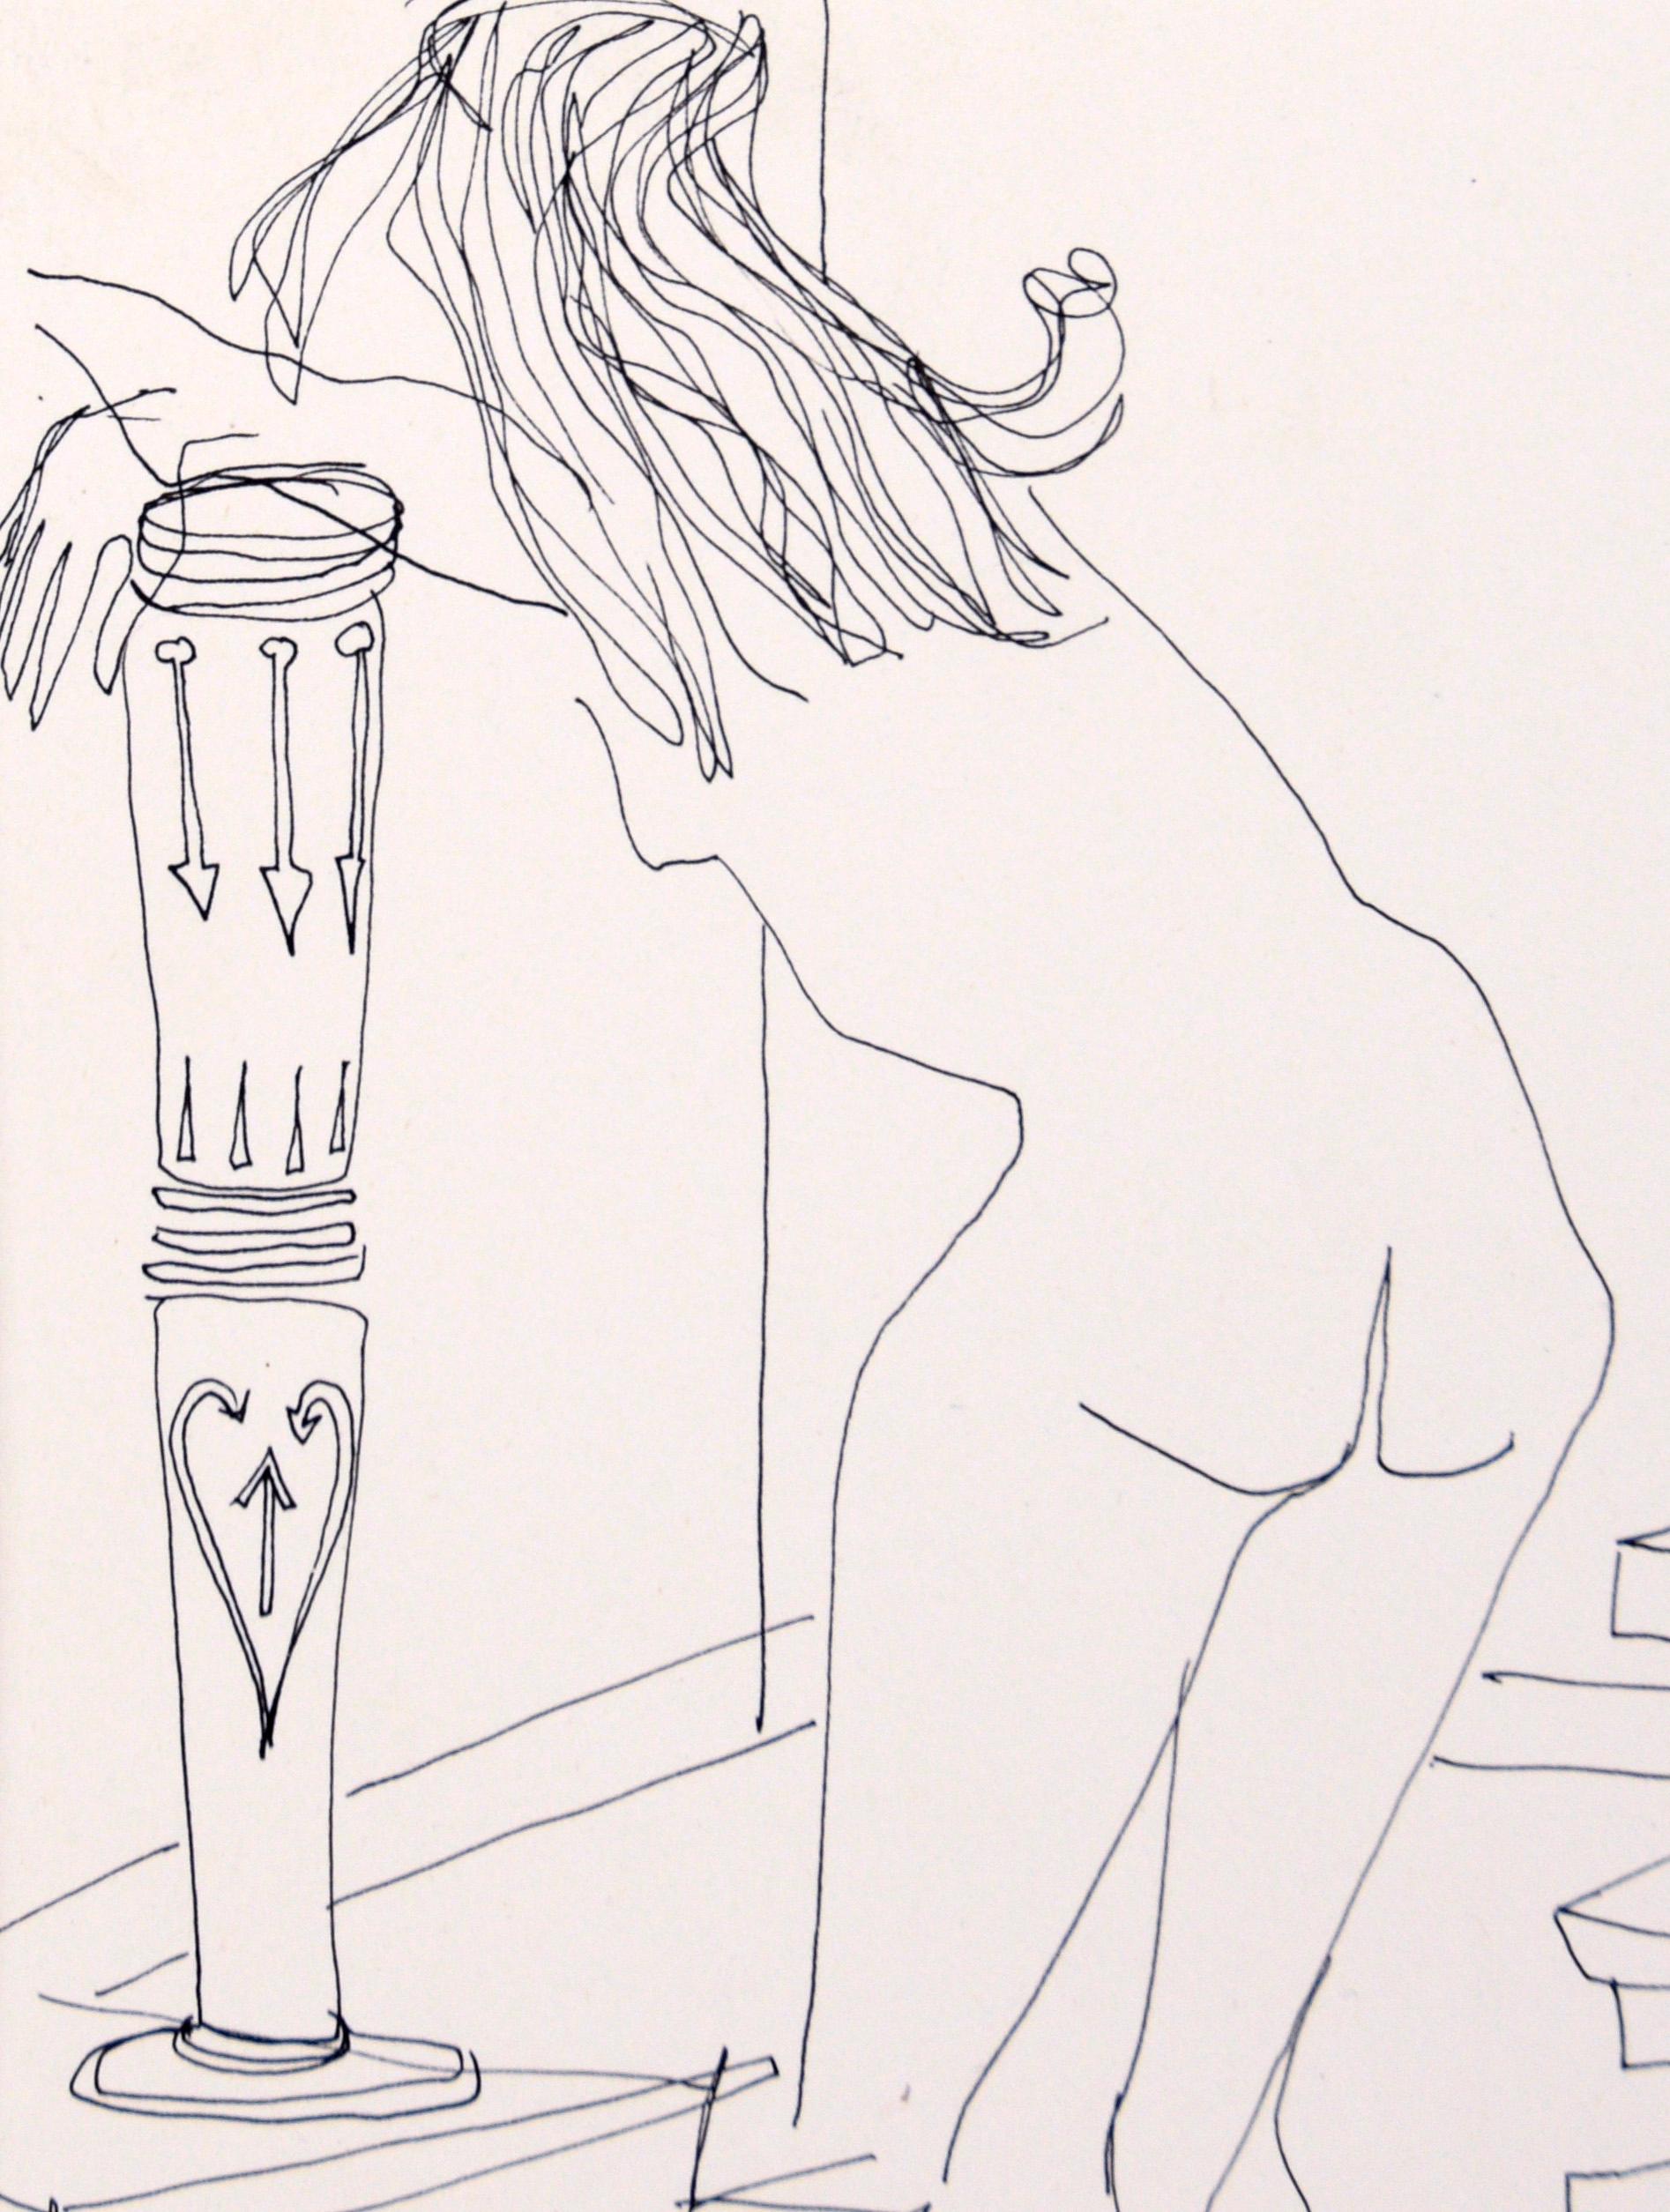 Life Drawing II - Figurative Female Nude in Pen on Paper - Art by Unknown